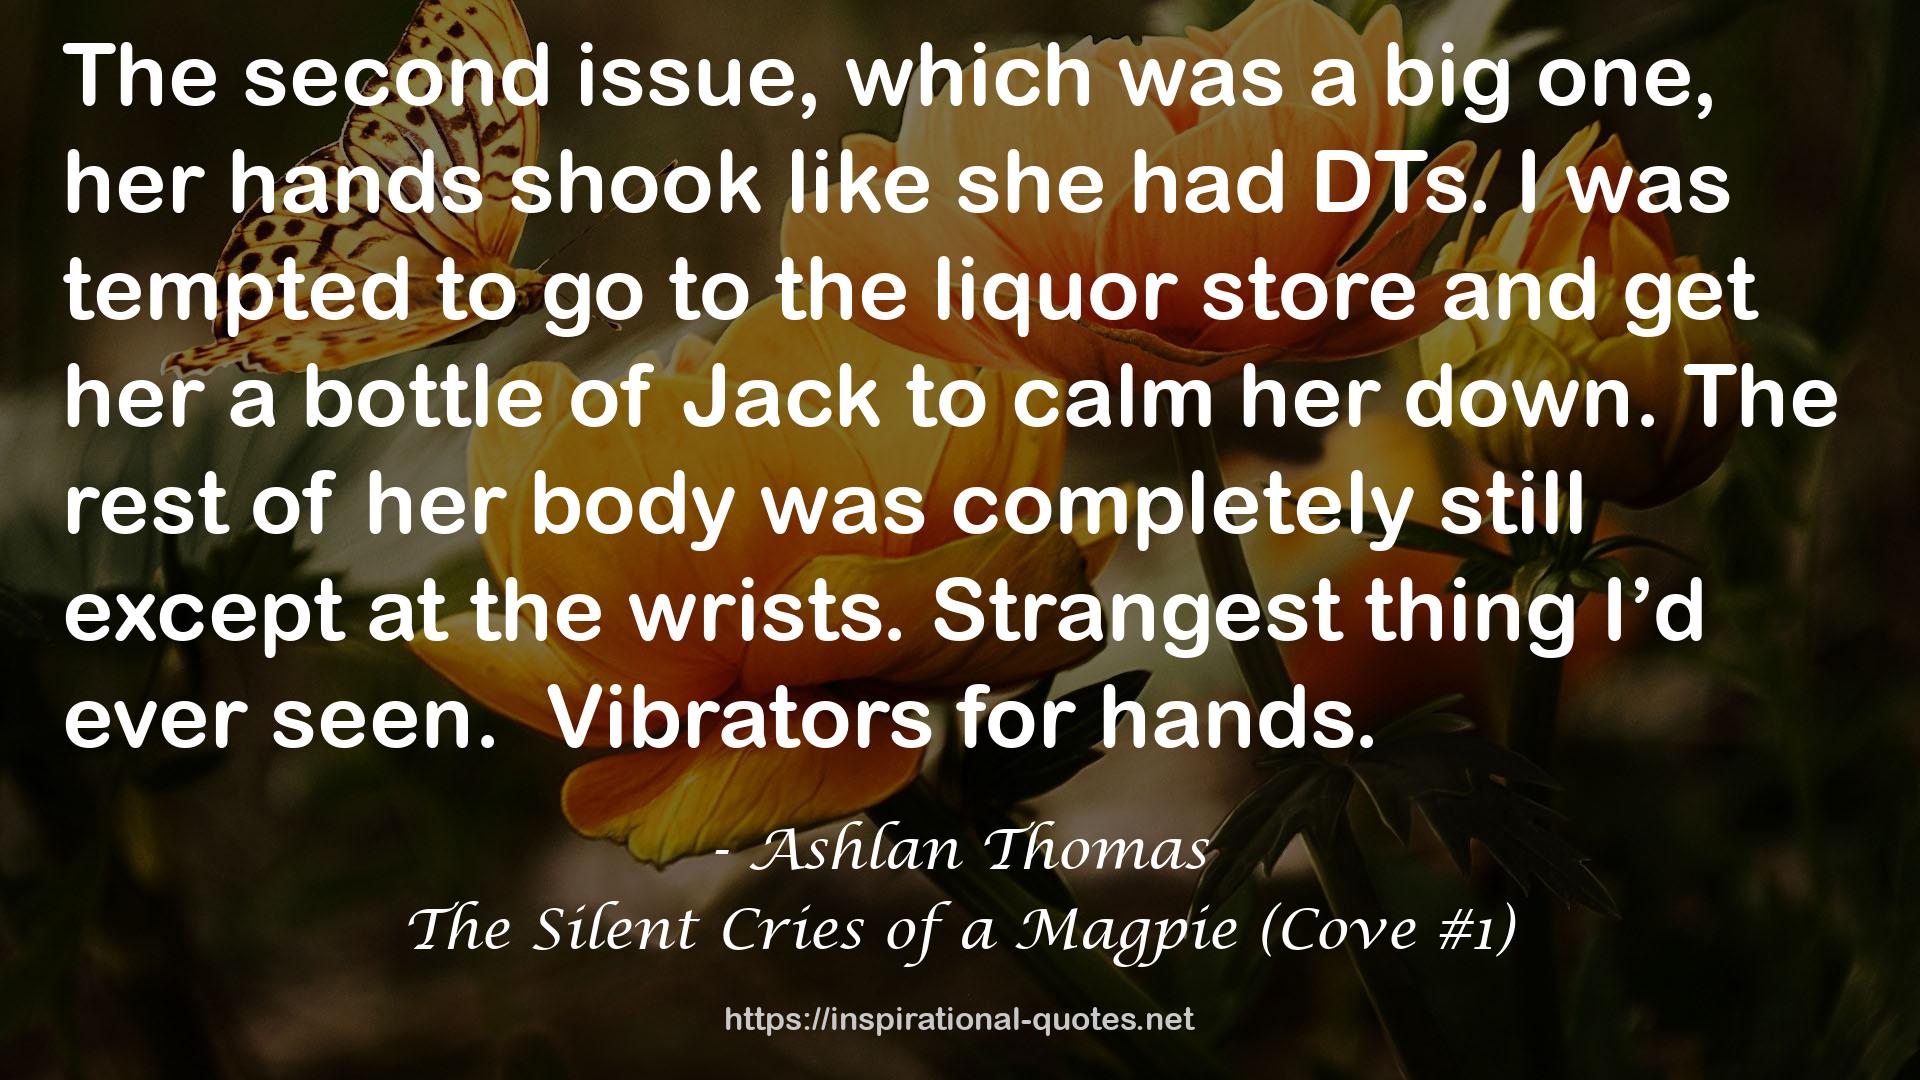 The Silent Cries of a Magpie (Cove #1) QUOTES